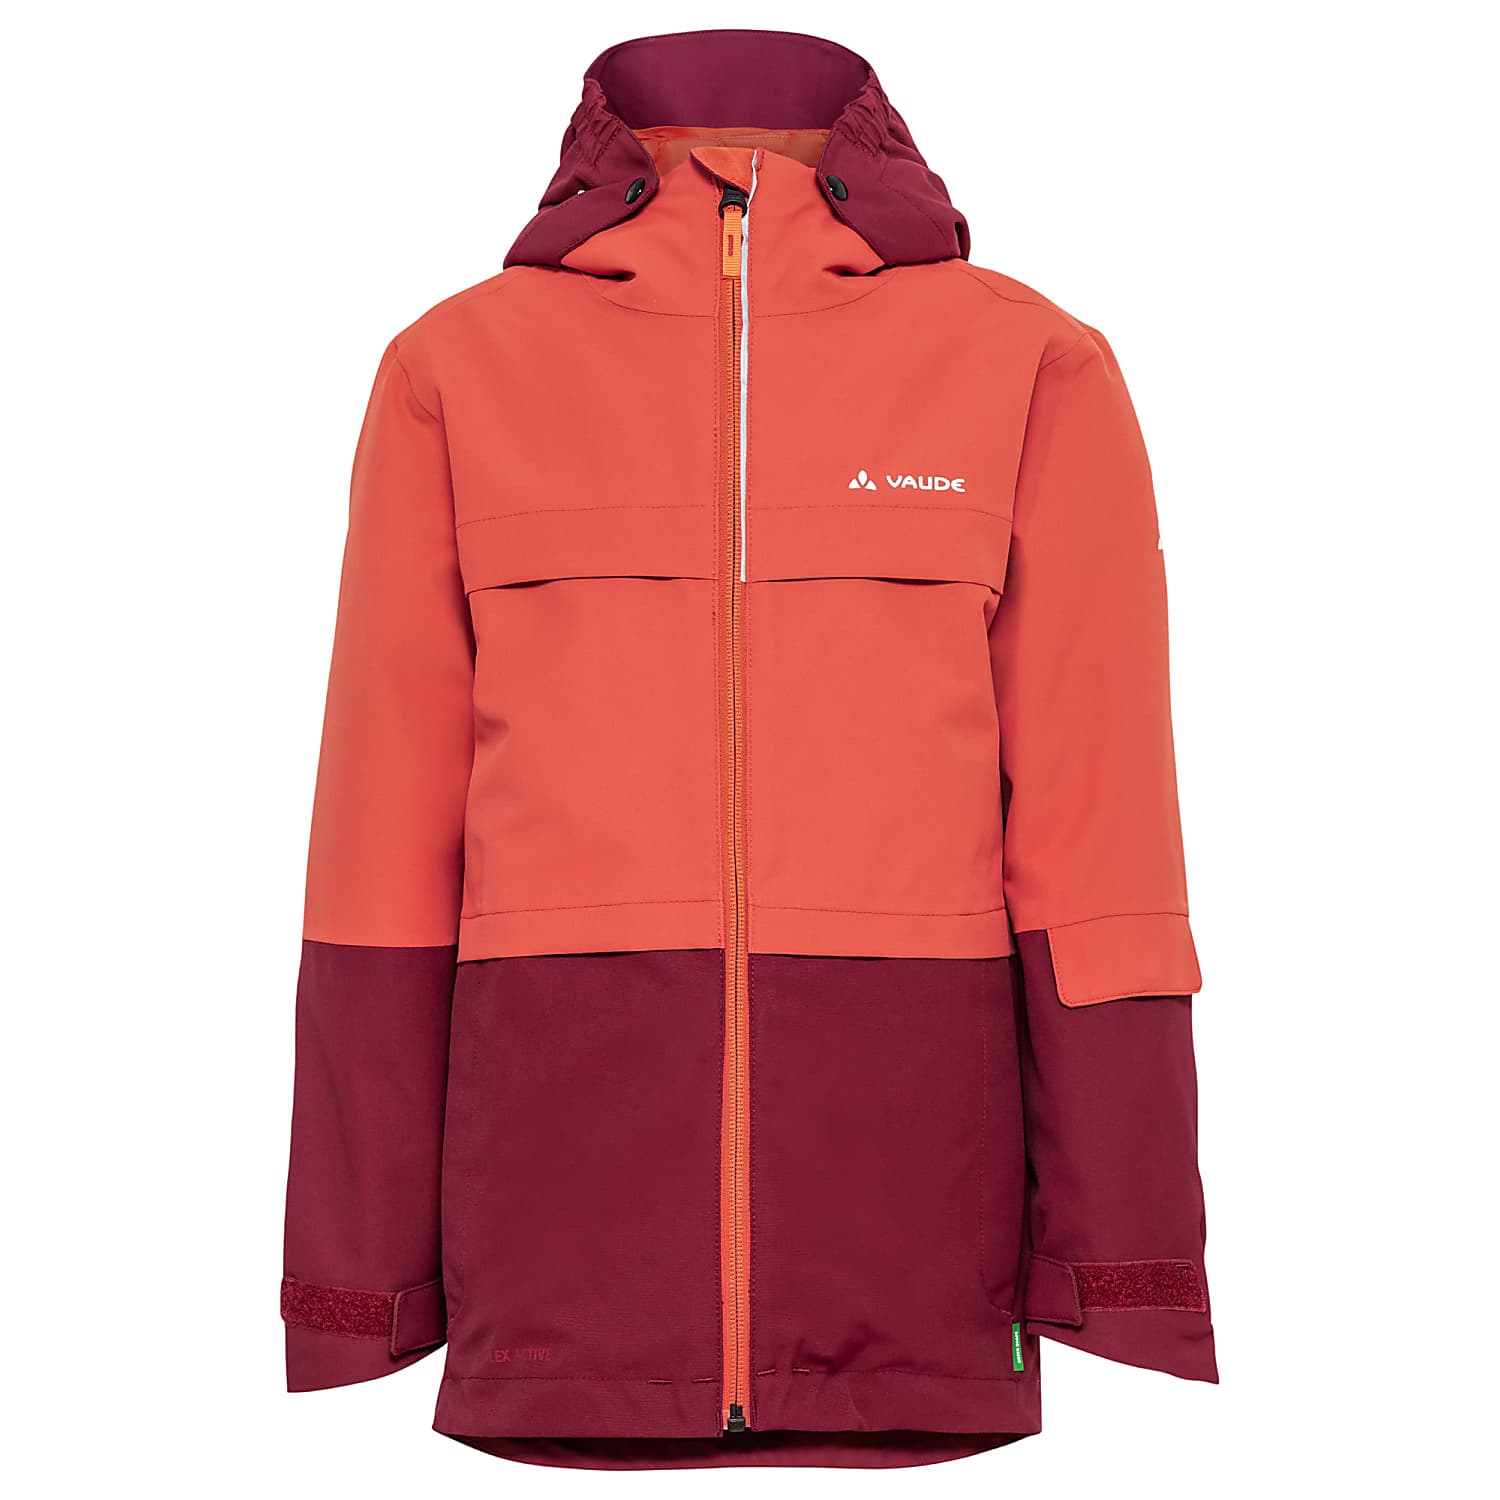 Vaude KIDS SNOW starts Hot Shipping II, Chili CUP 60£ JACKET - at 3IN1 Free